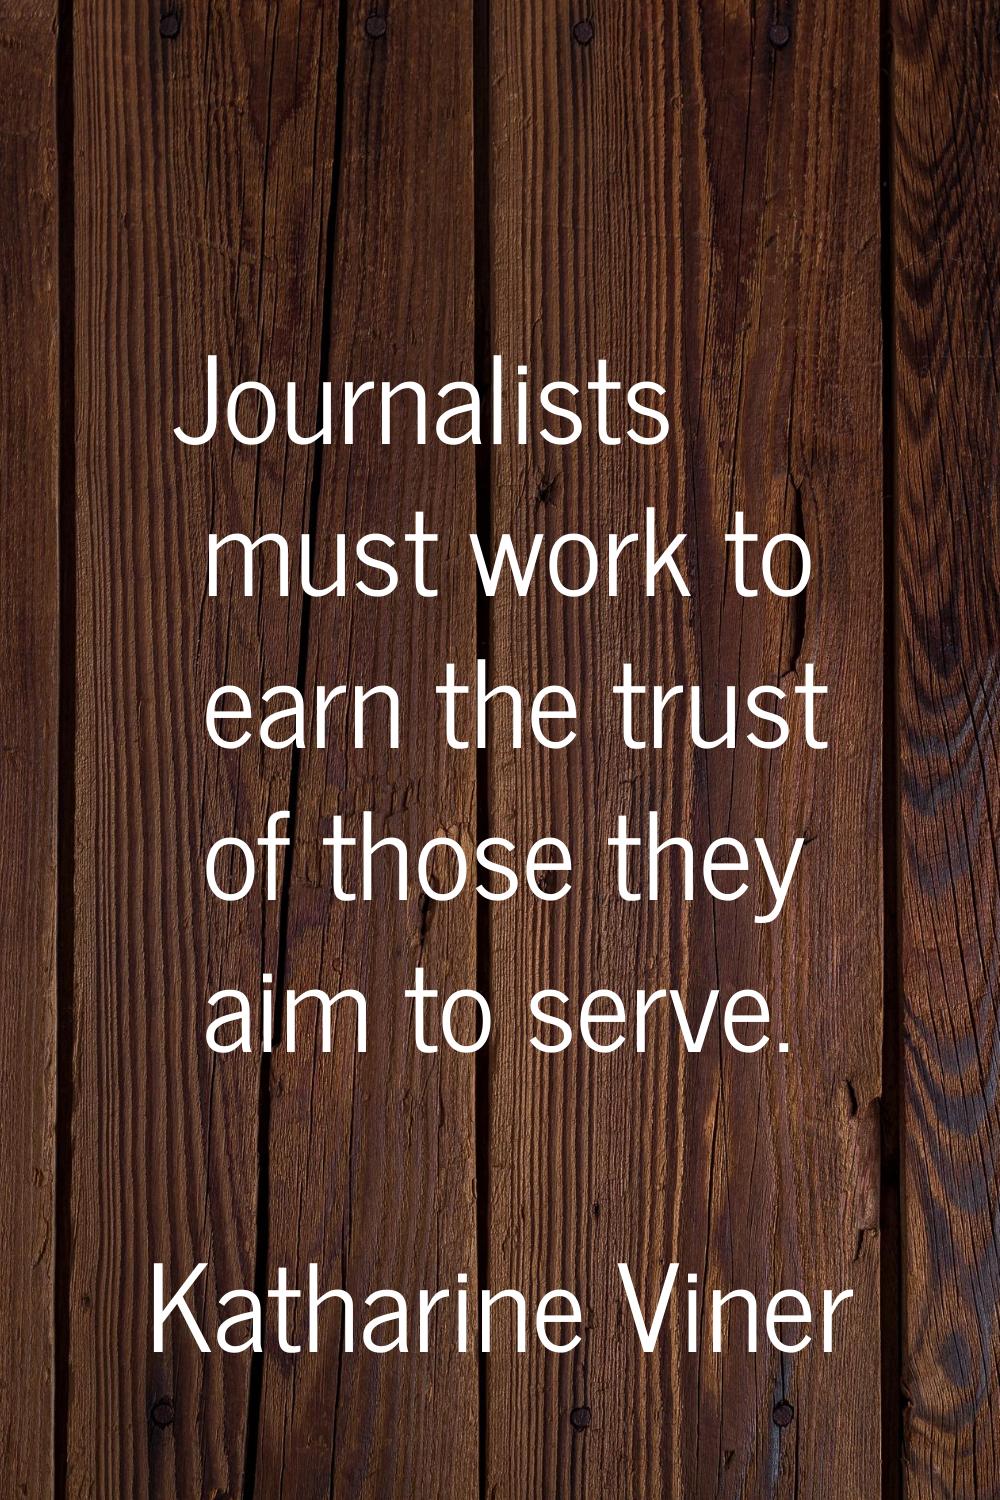 Journalists must work to earn the trust of those they aim to serve.